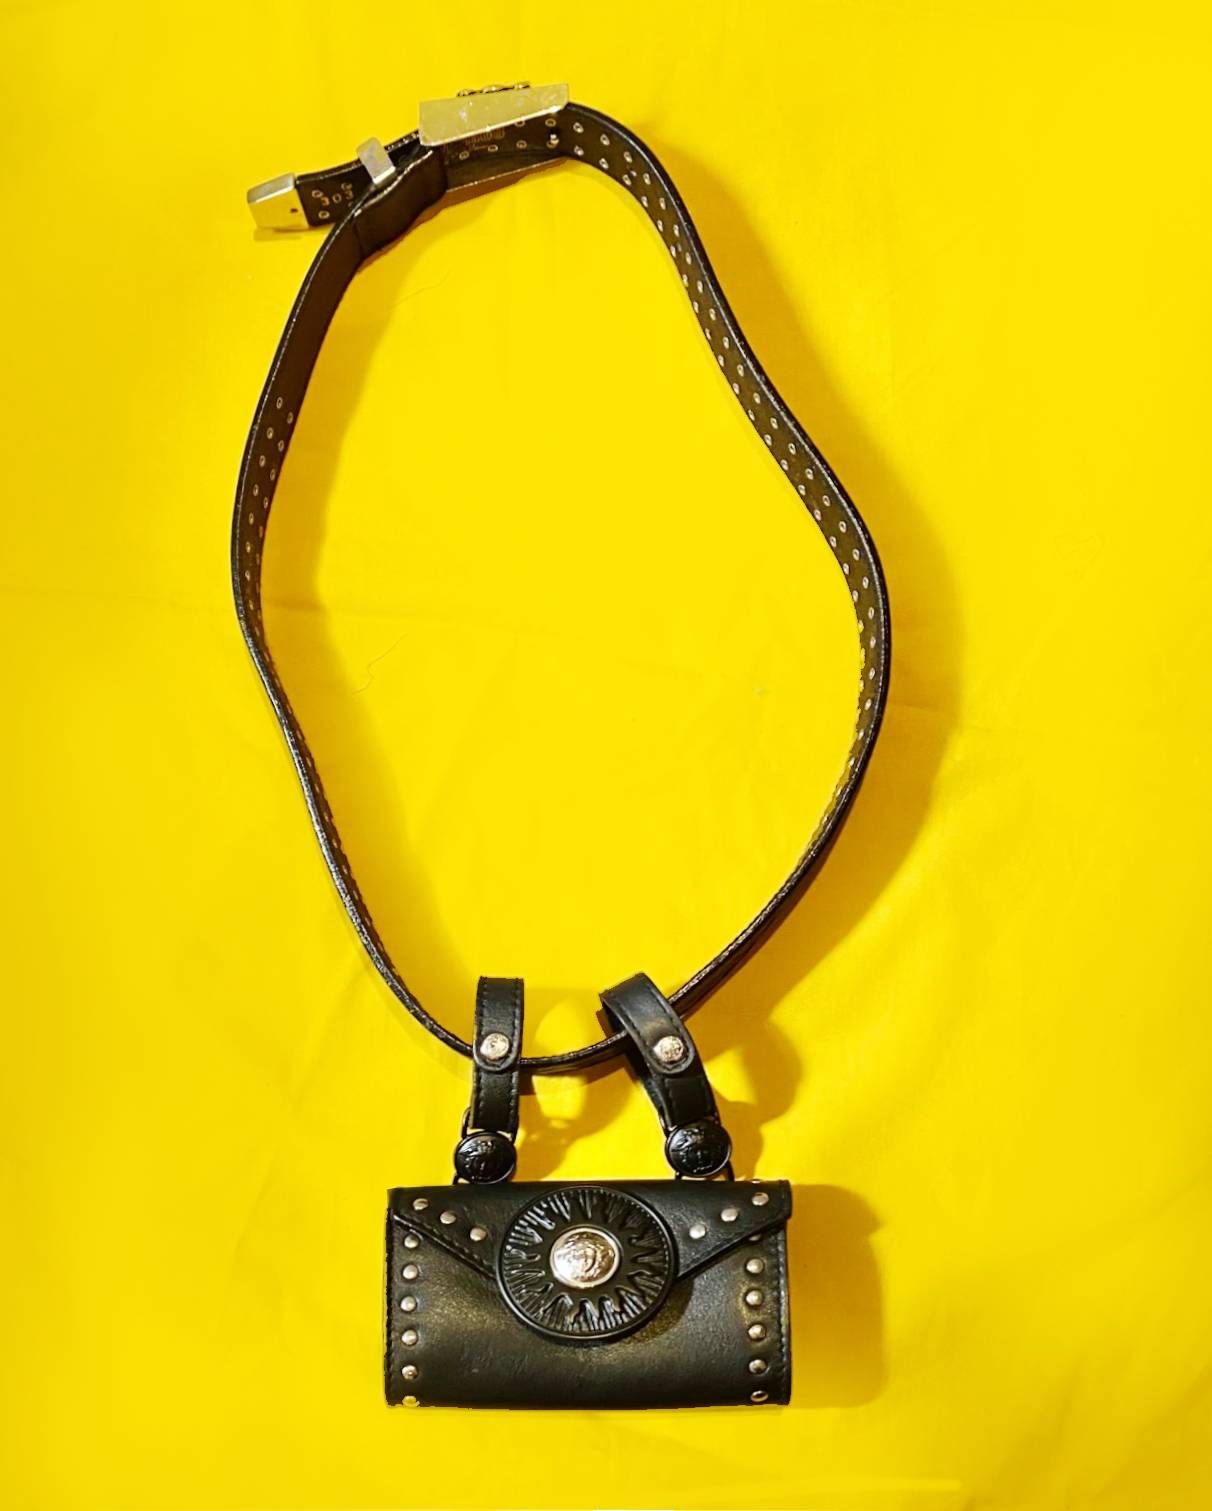 1990's GIANNI VERSACE STUDDED MEDUSA LEATHER MINI BUM BAG AND BELT - style - CHNGR